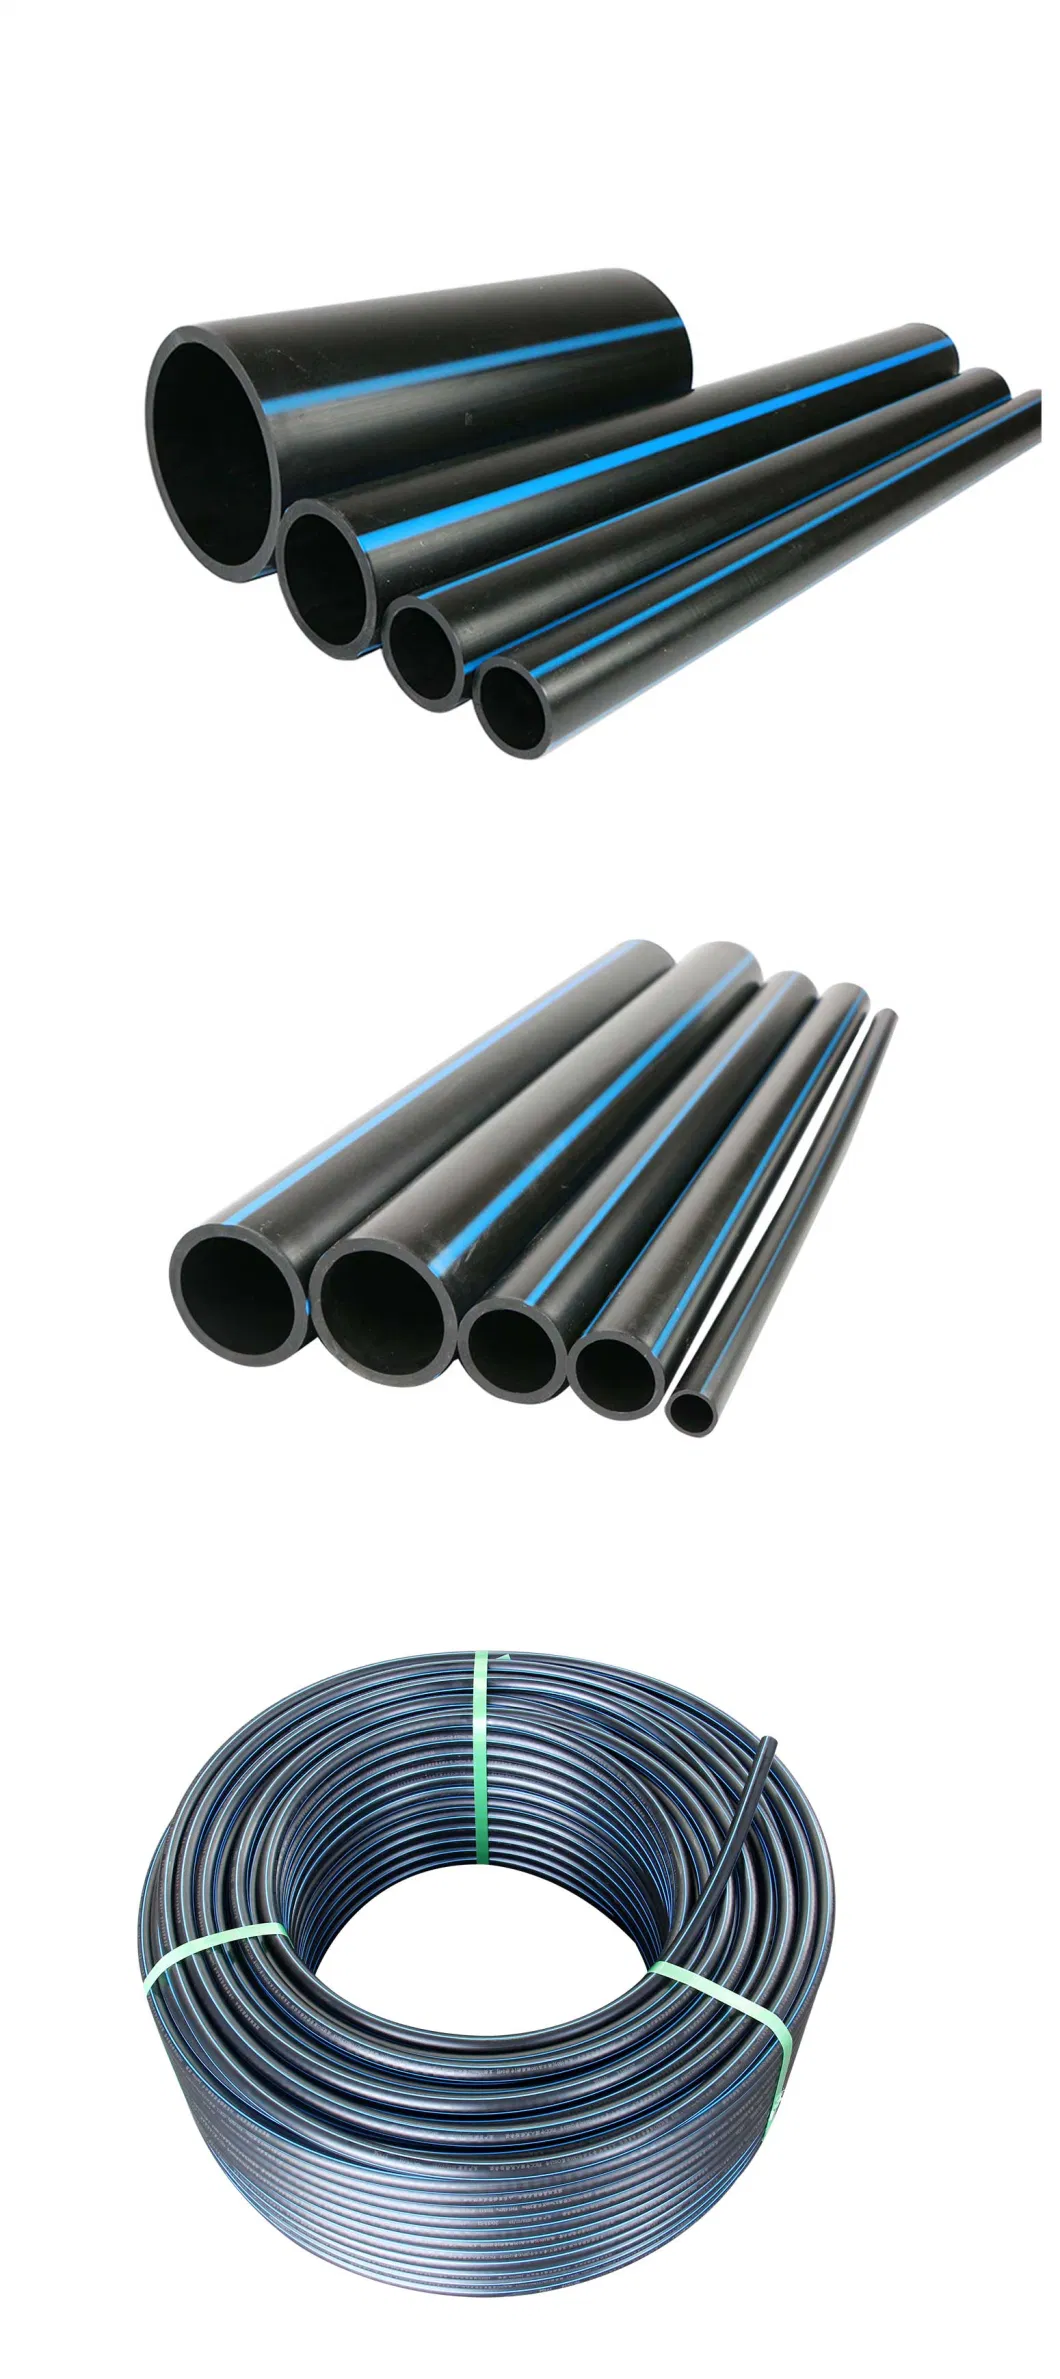 HDPE Pipe for Potable Water/Waste Water Large Diameter 450mm 500mm 560mm 630mm 710mm 800mm 900mm 1000mm SDR17 SDR11 Pn1.0MPa Pn1.6MPa